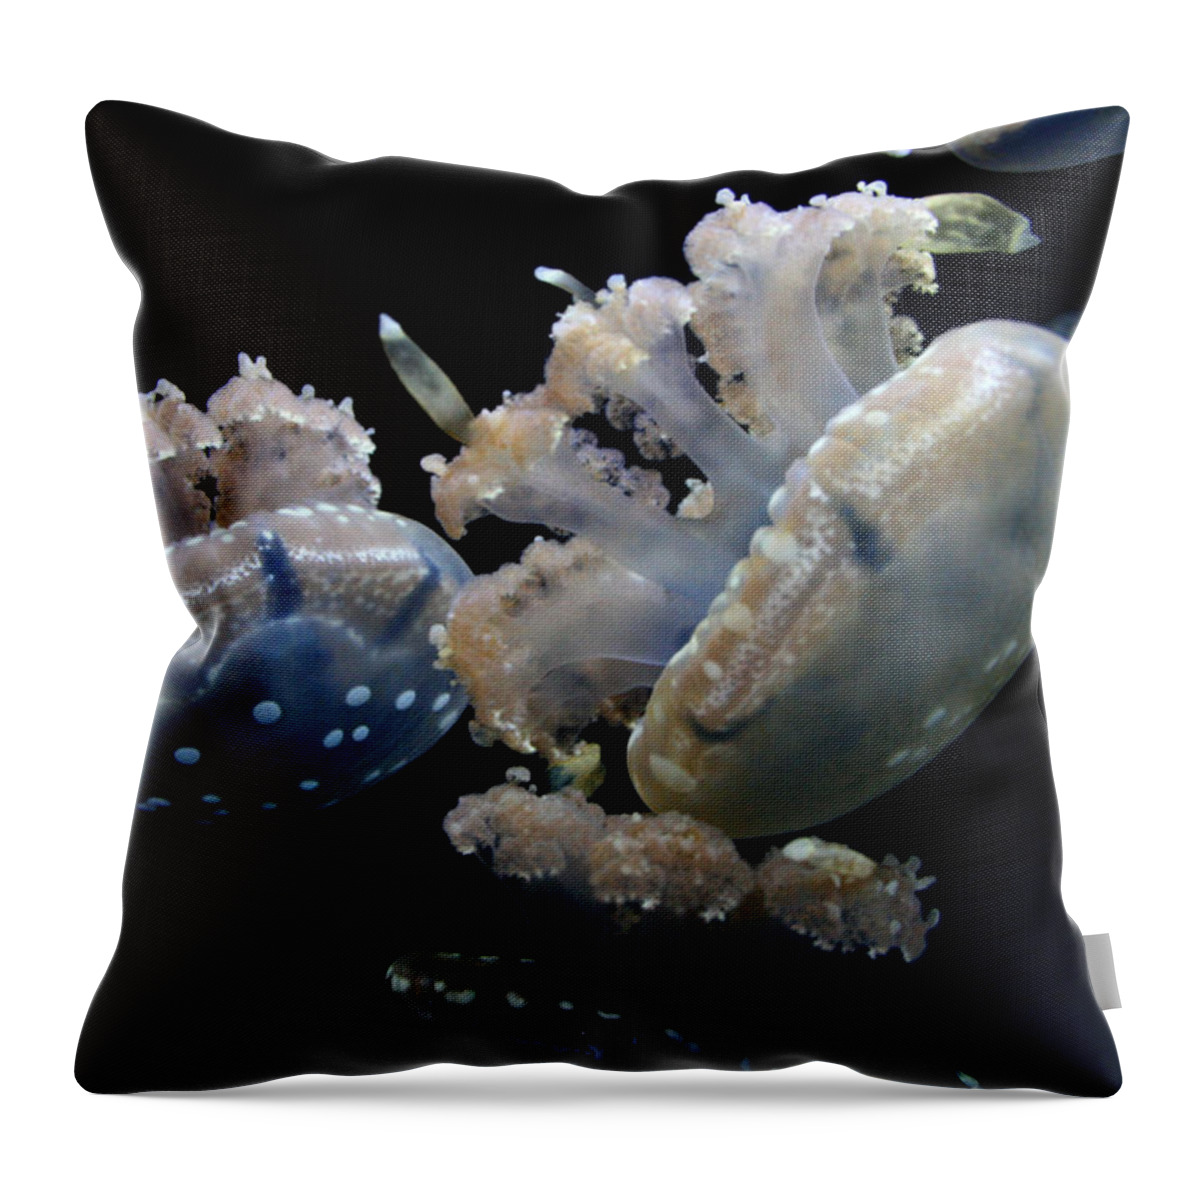 Waikiki Aquarium Throw Pillow featuring the photograph Spotted Jelly Fluther by Jennifer Bright Burr